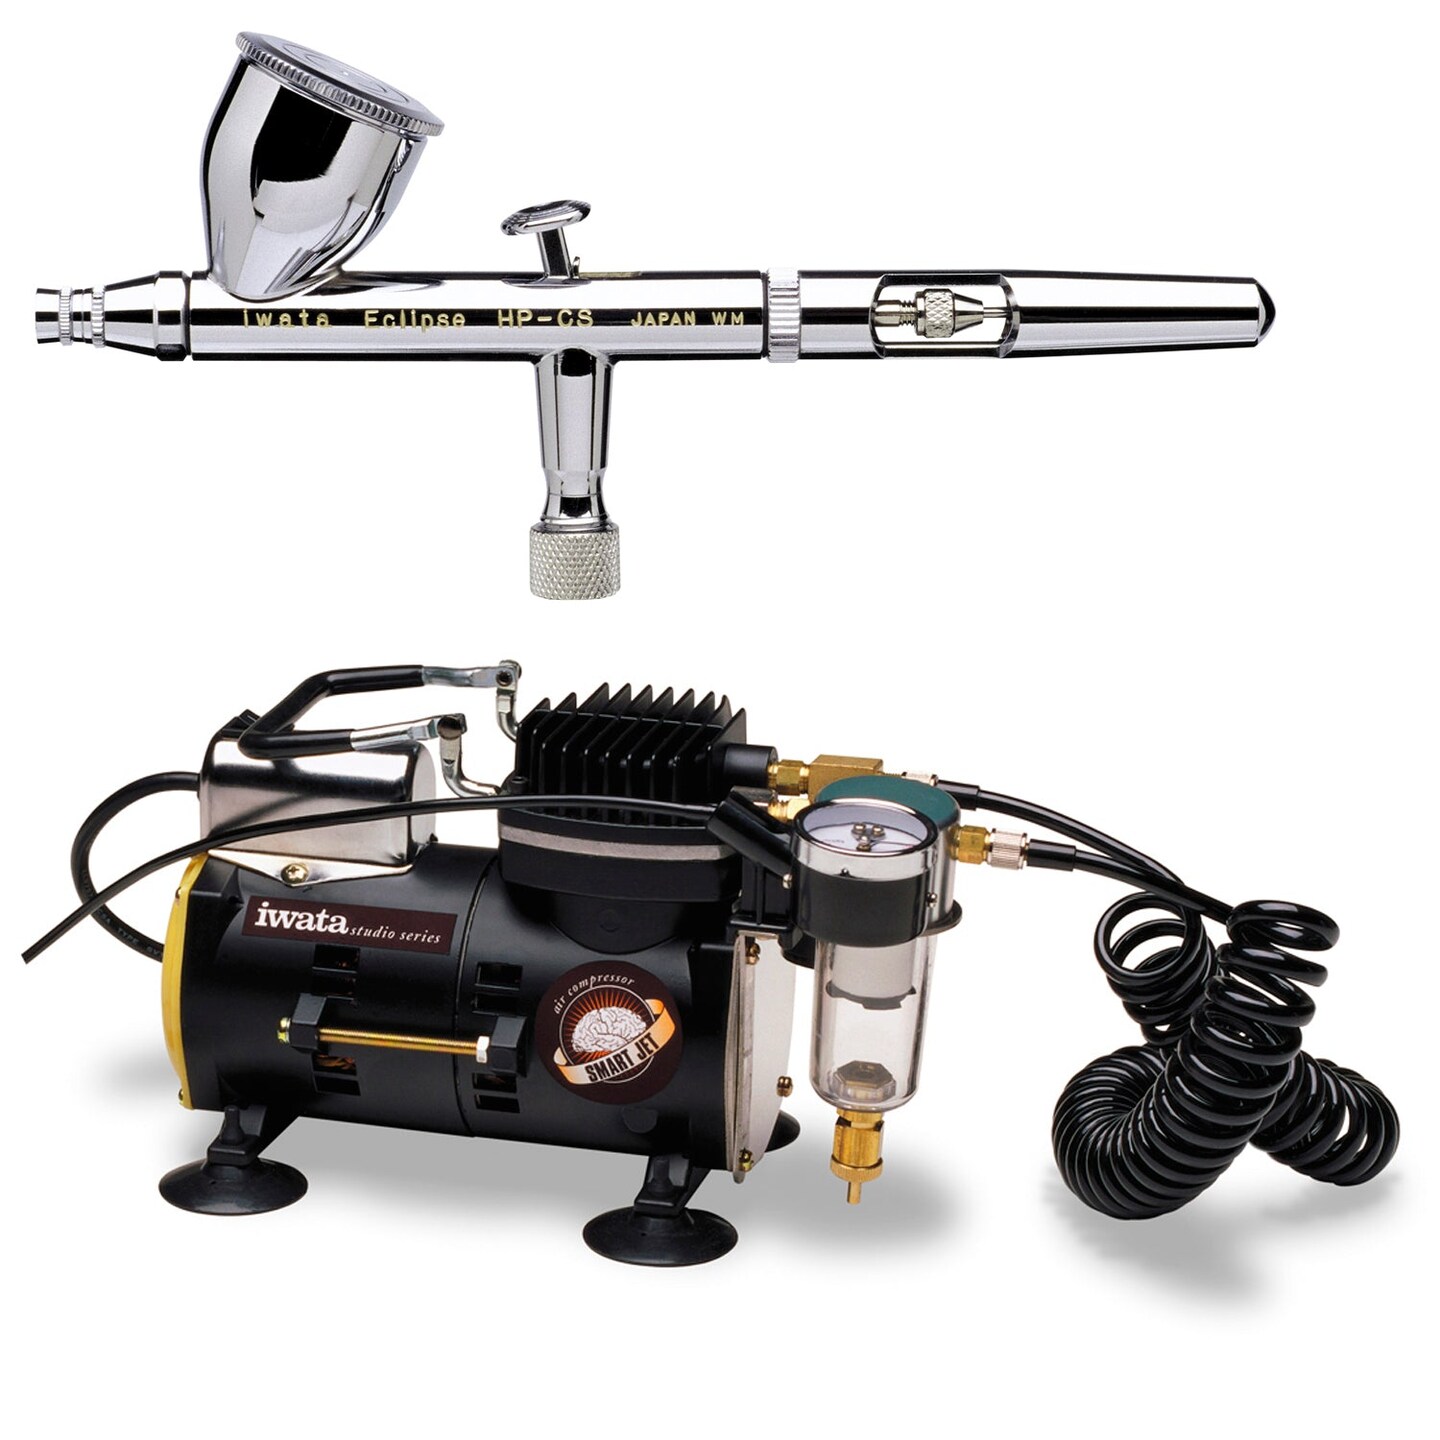 Iwata Eclipse Series Airbrushes and Sets